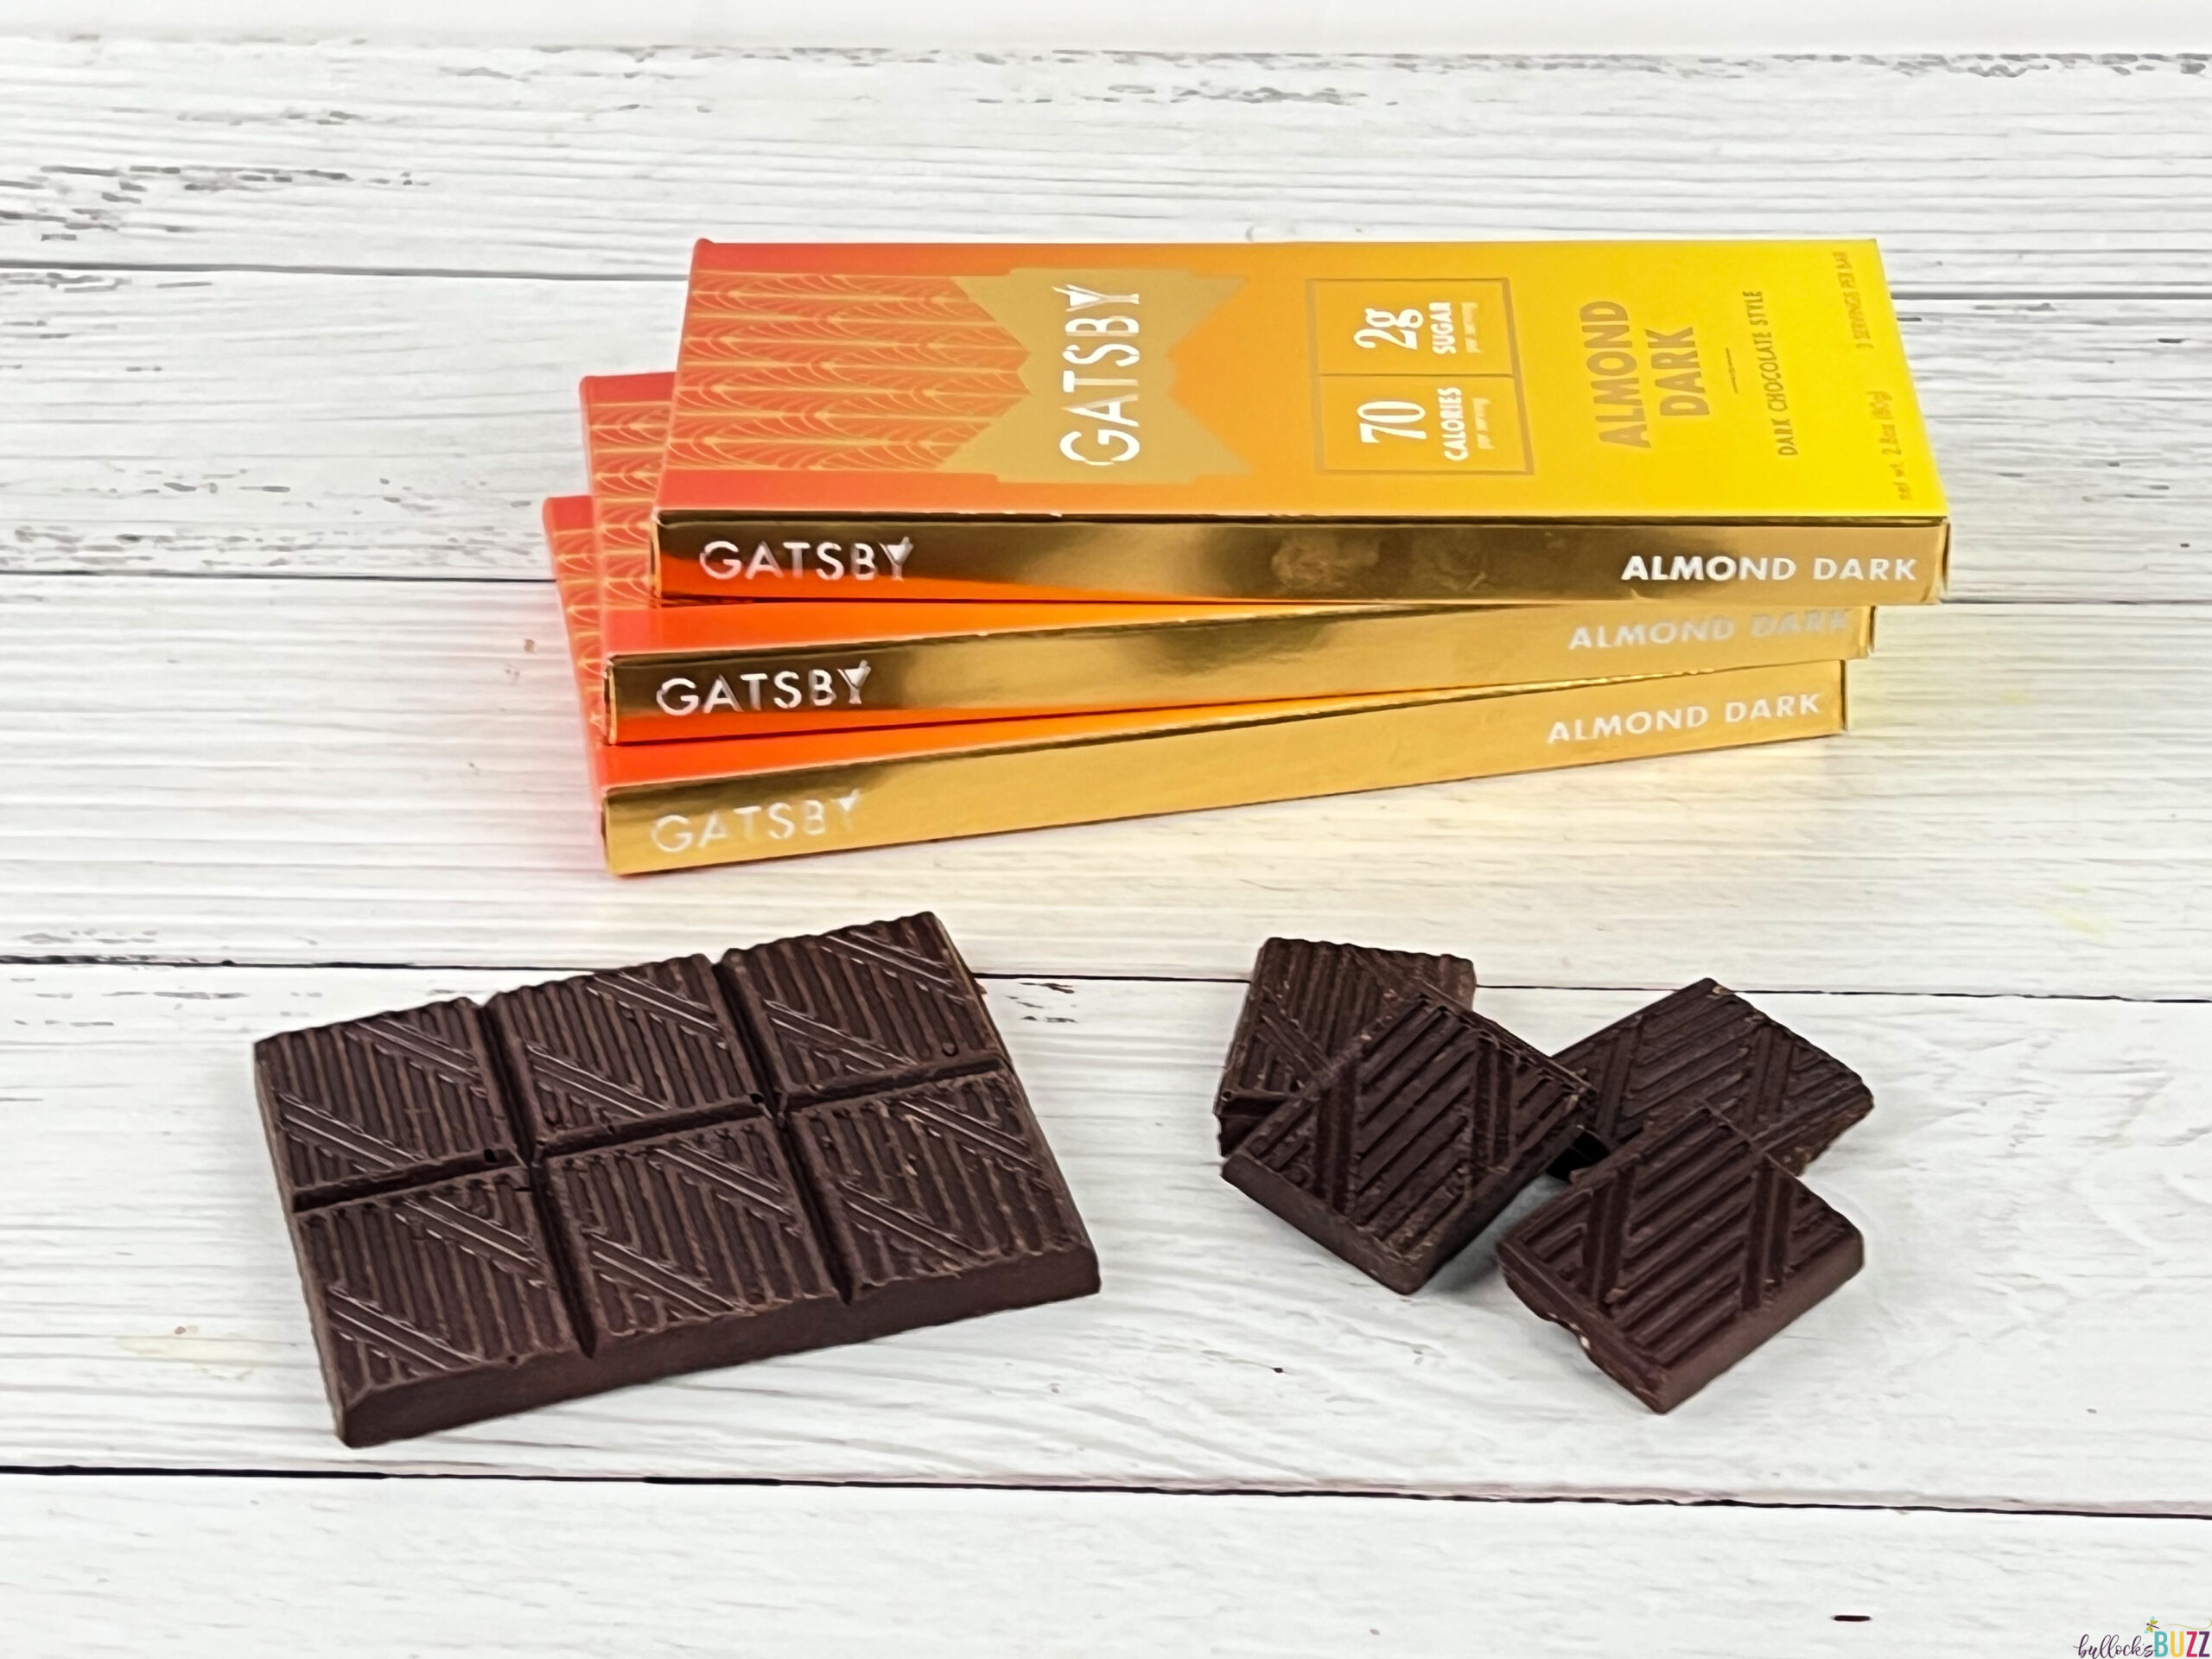 Gatsby Chocolate: Delicious Chocolate Without the Guilt - O the